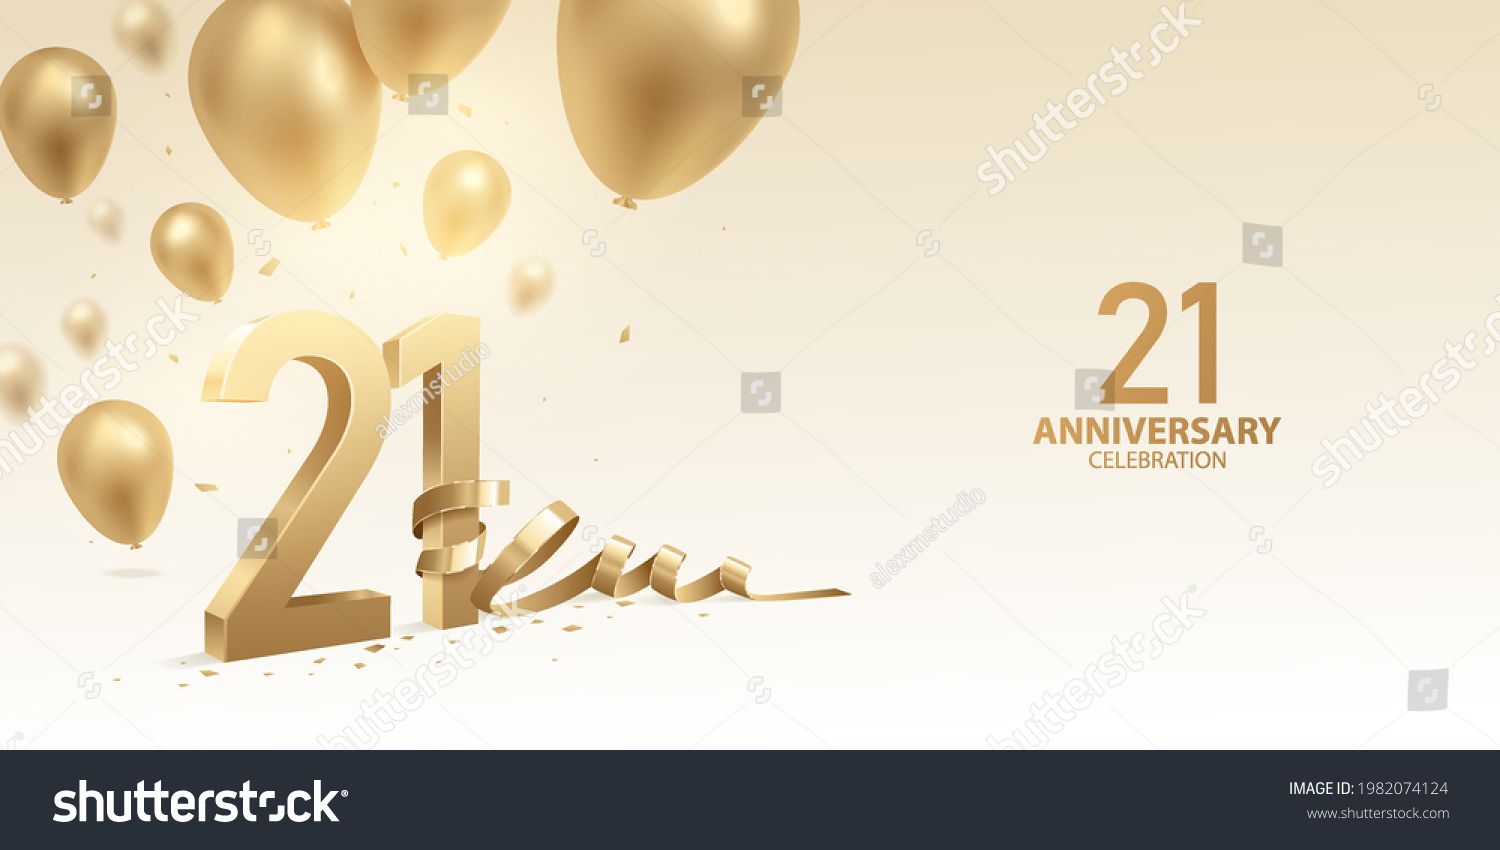 SVG of 21st Anniversary celebration background. 3D Golden numbers with bent ribbon, confetti and balloons.
 svg